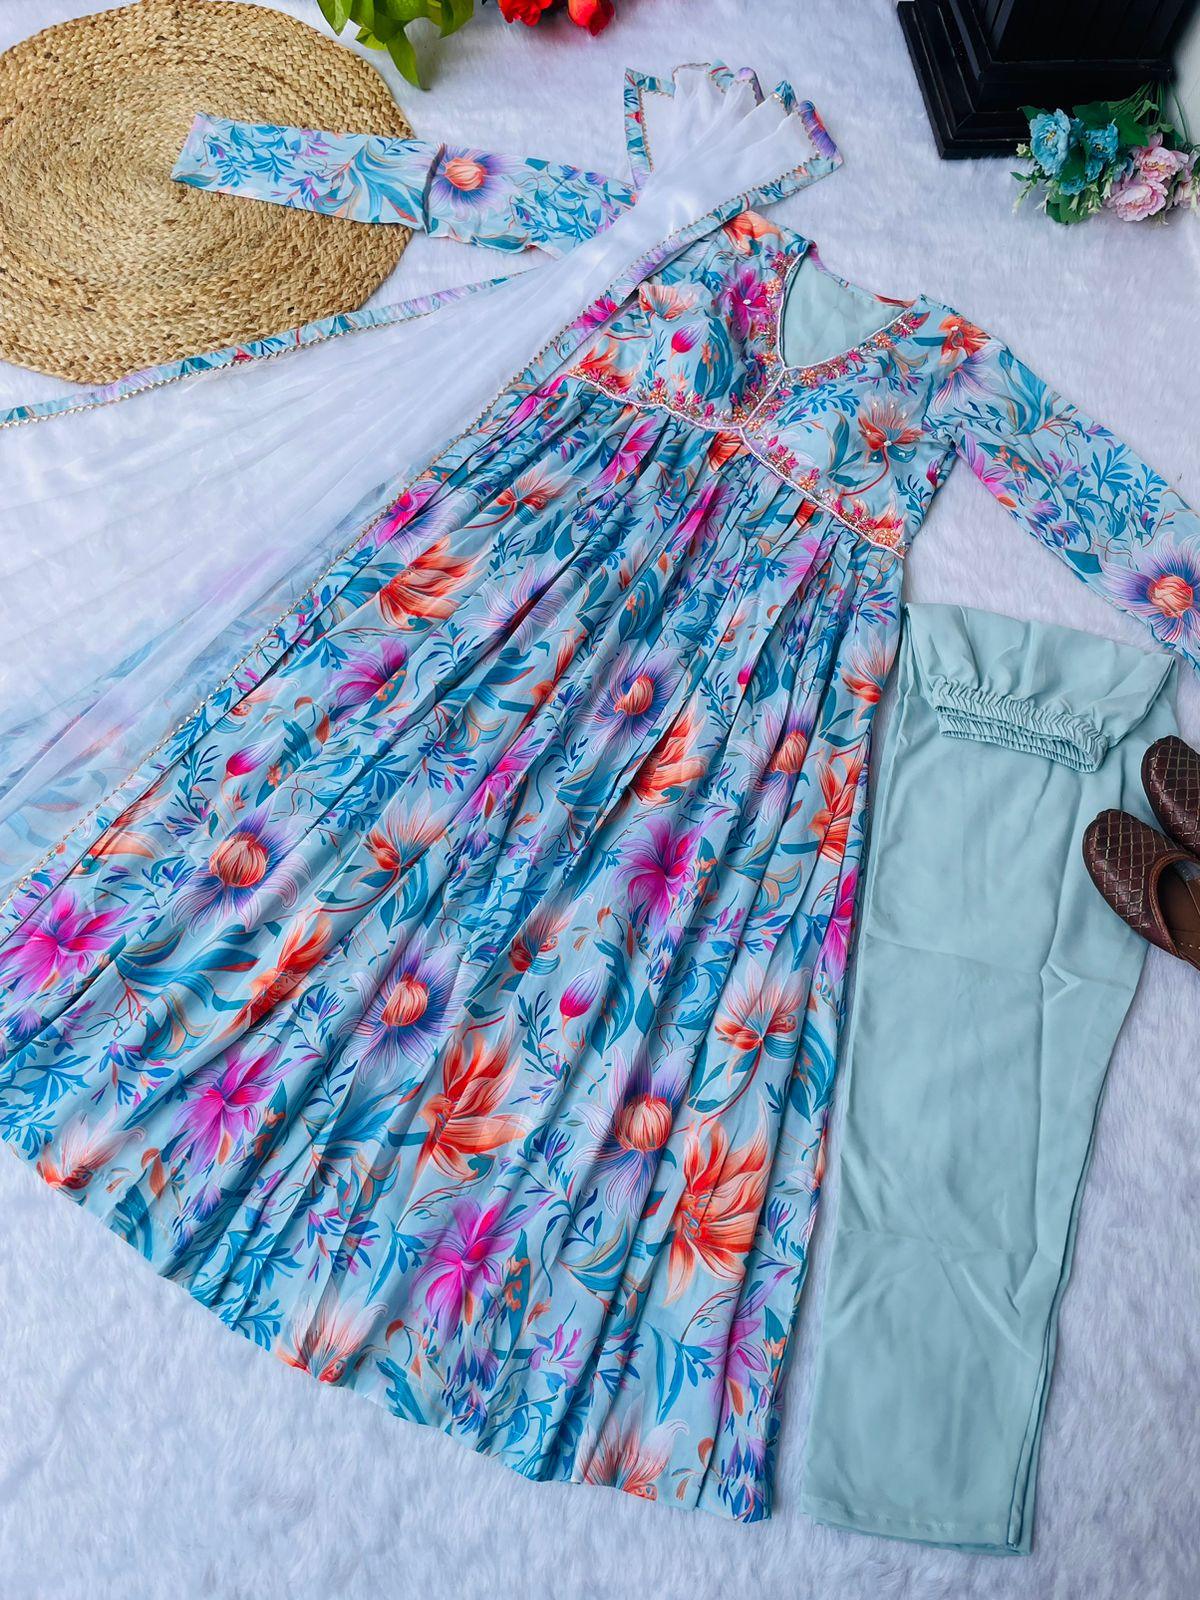 Blue Floral Special: Aliya Cut Dresses with Dupatta and Pant! 🌺🌺 - Inayakhan Shop 